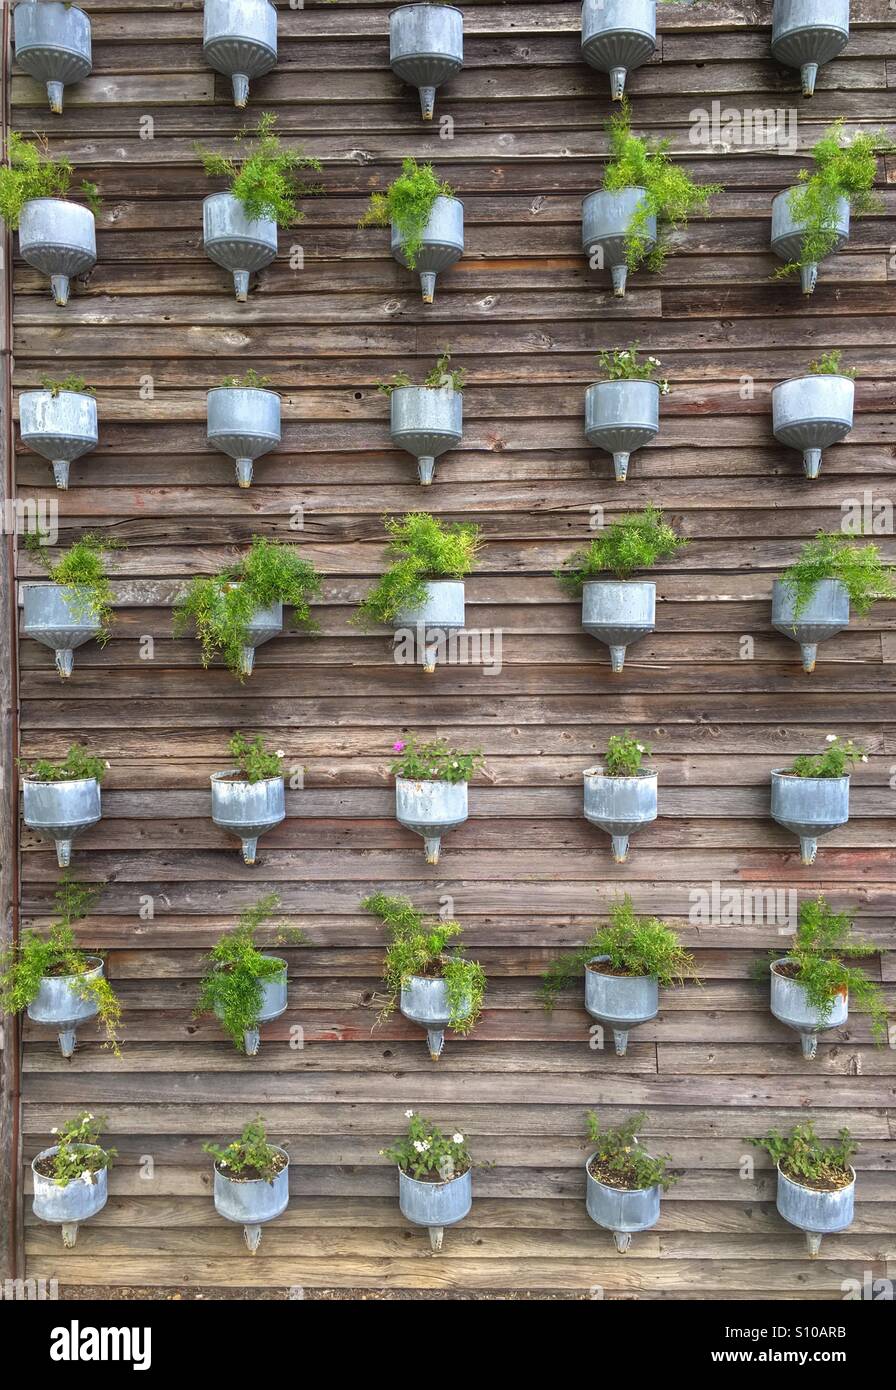 Planters on a wall Stock Photo